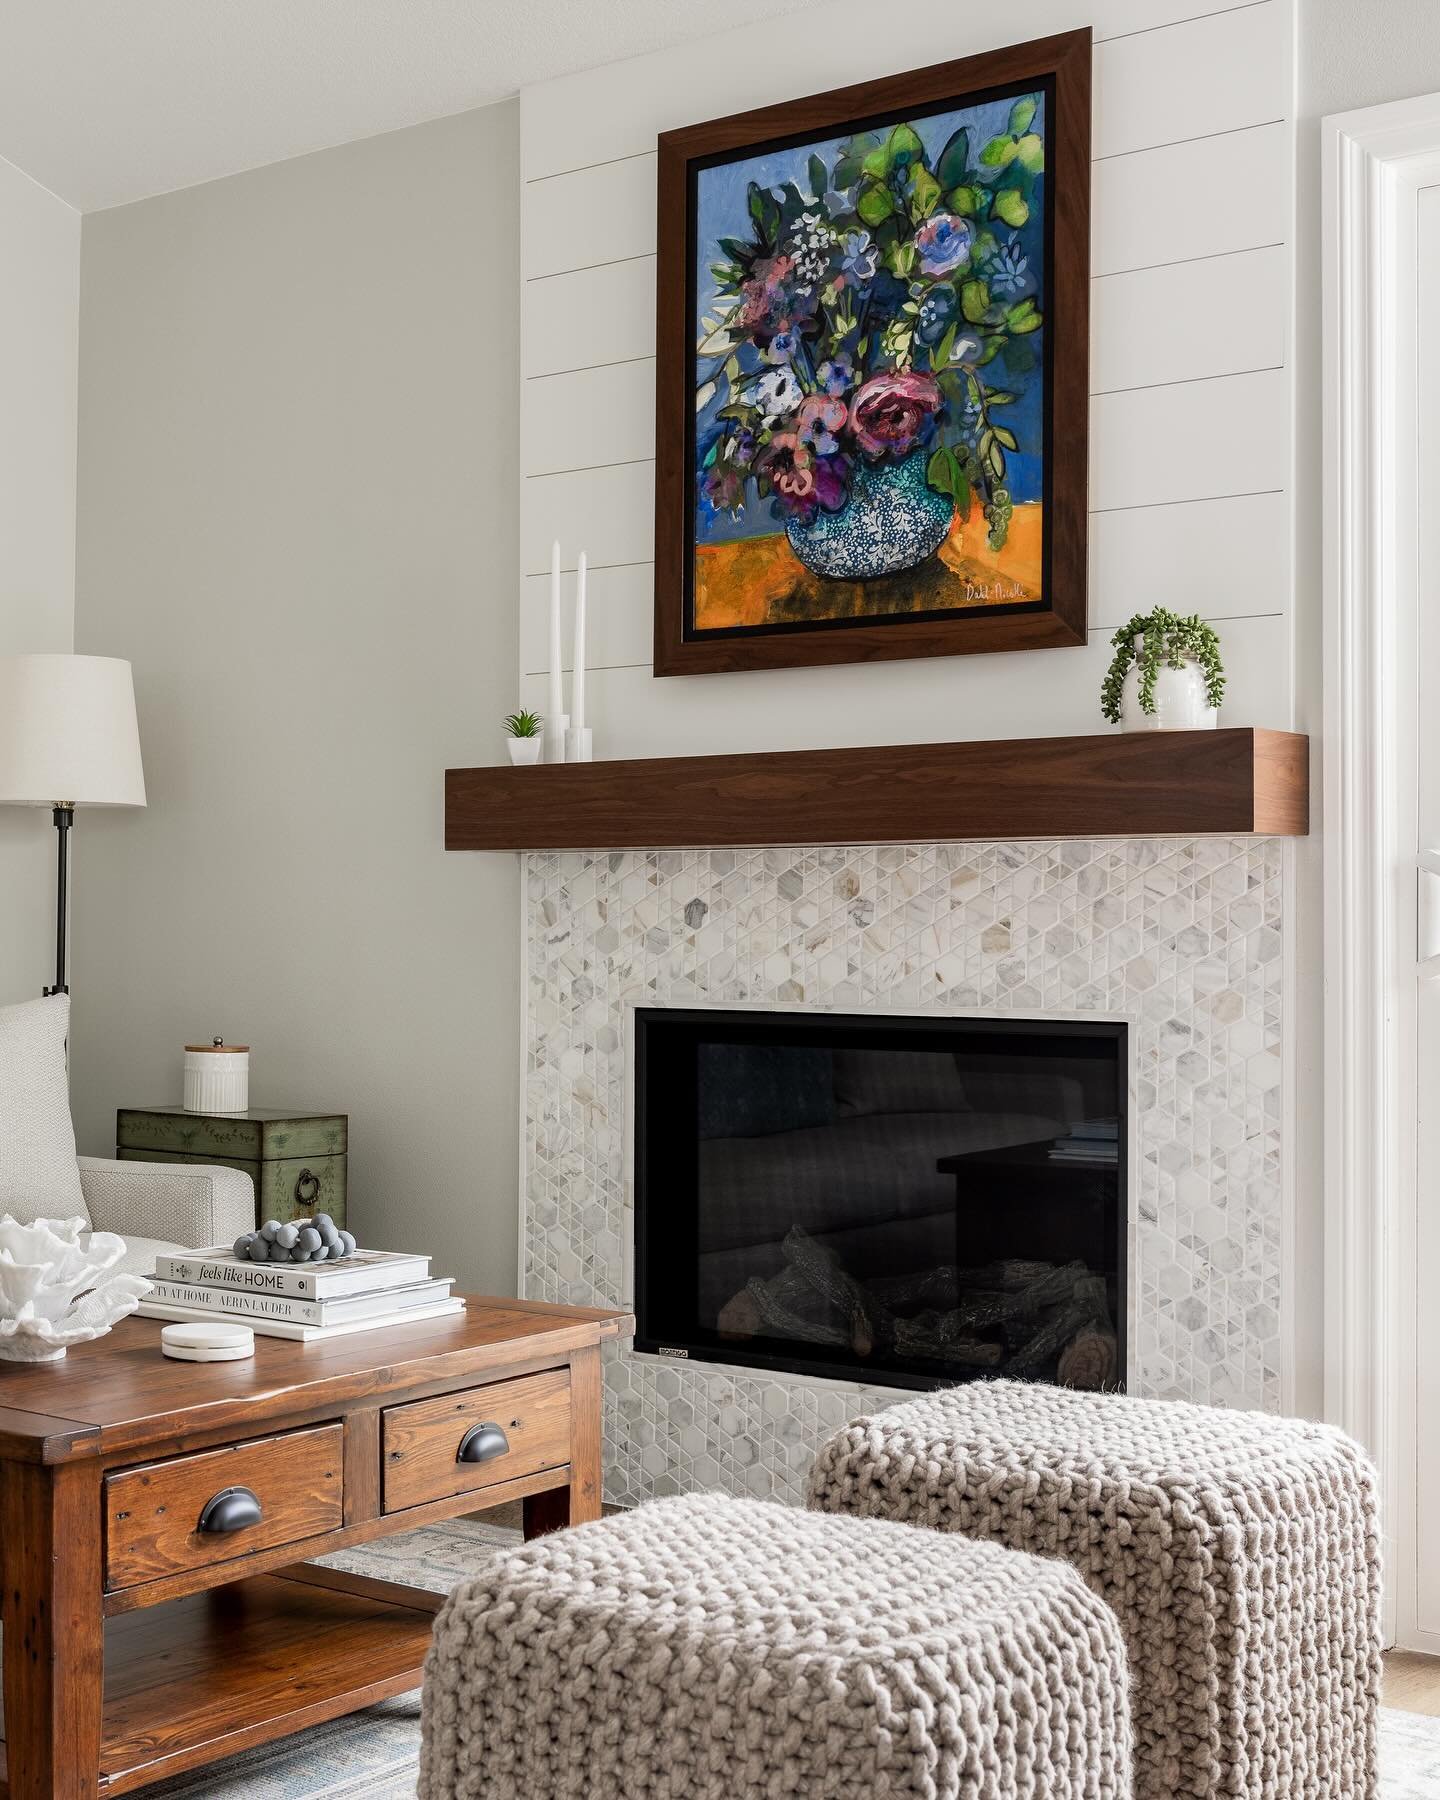 When you&rsquo;re ready to update your fireplace surround painting your existing brick is the quickest and easiest way to update it as most of us have seen online and in magazines. In addition to adding a beautiful mantle, whether custom made or pref